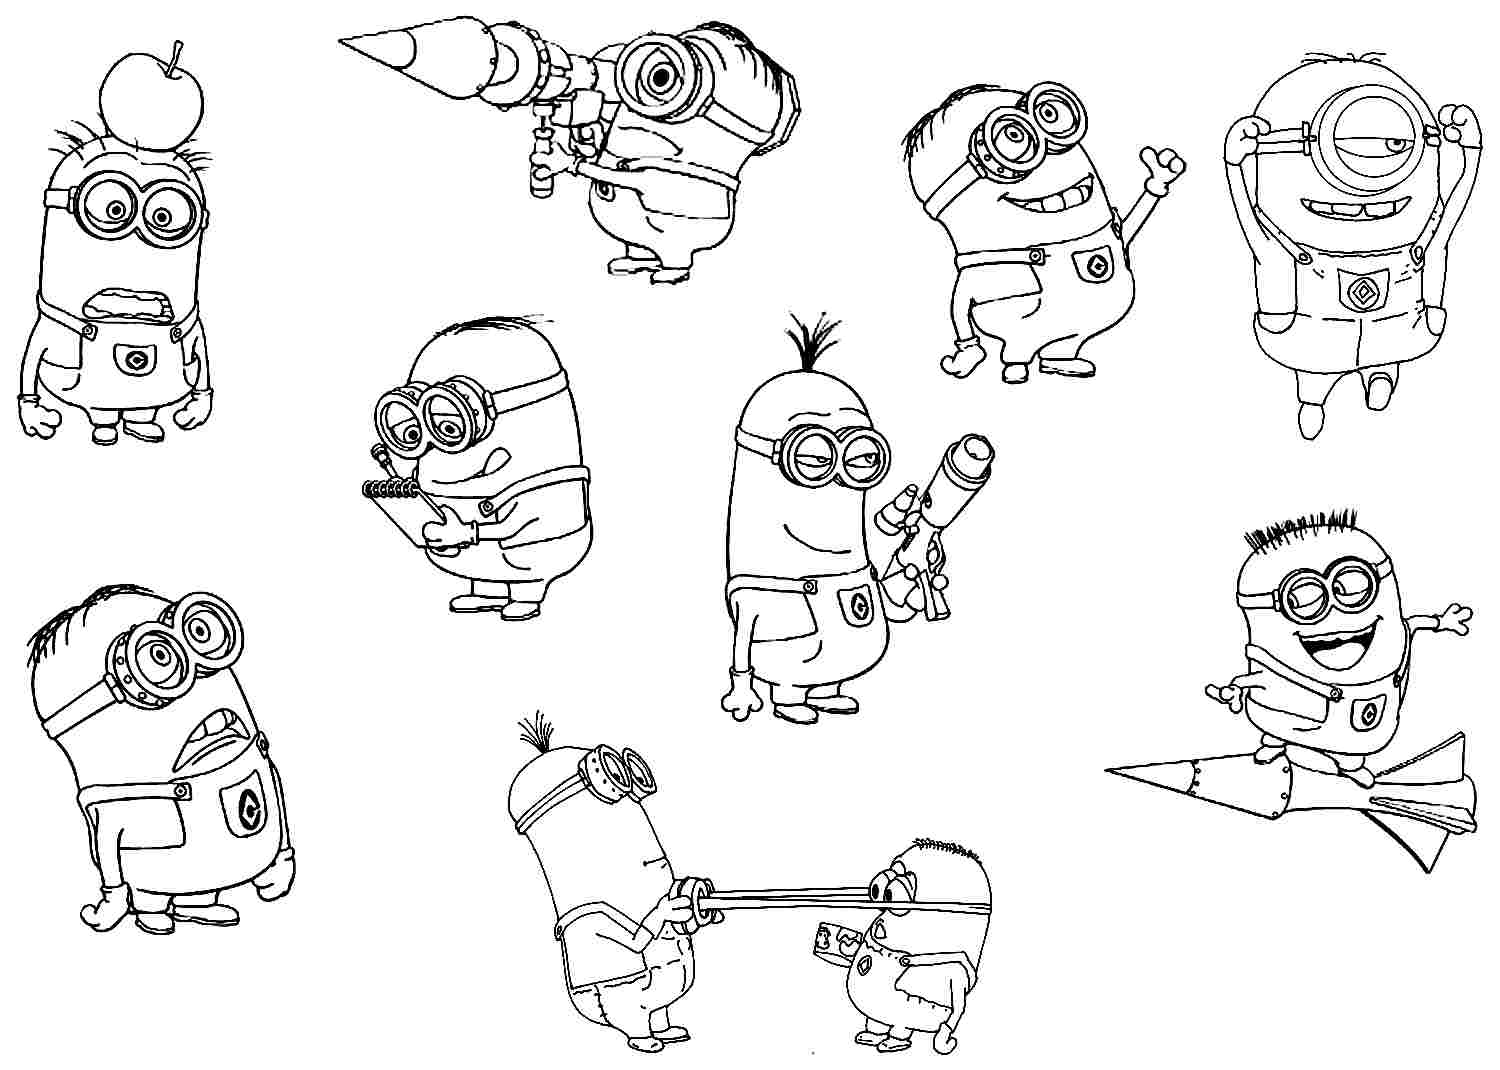 11 Pics of Minion Movie Coloring Pages Printable Free - Free ...